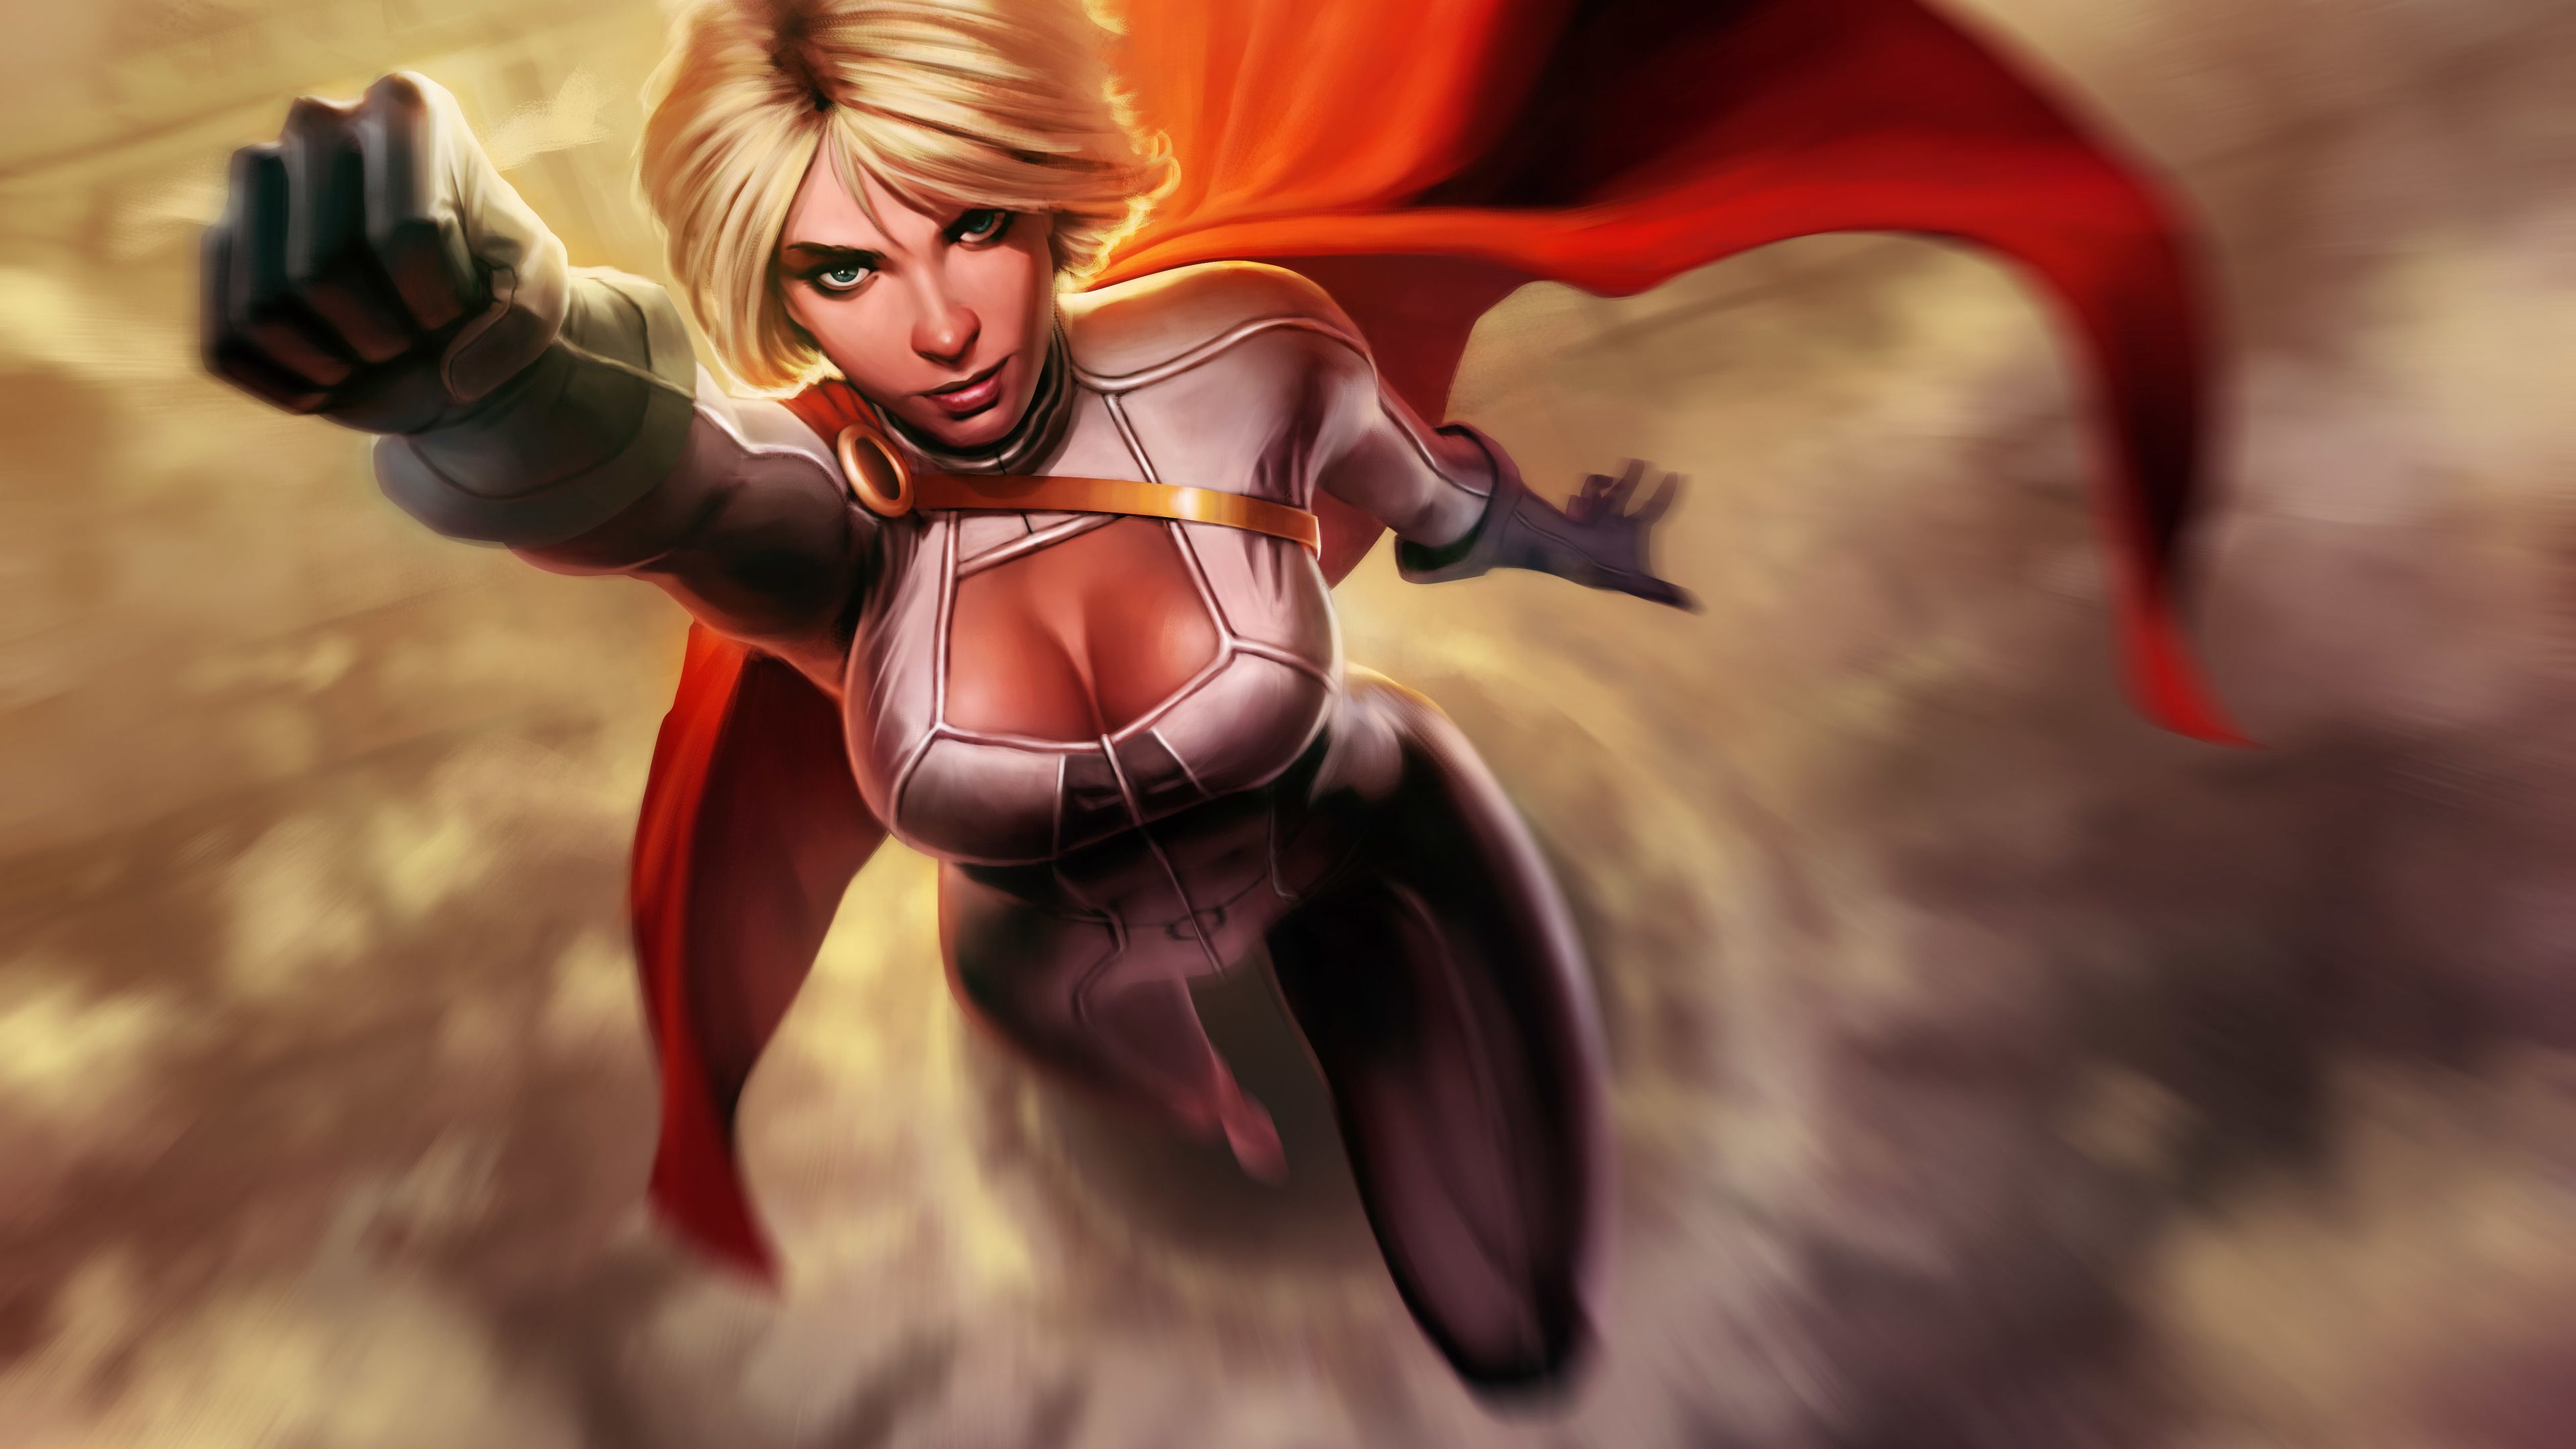 Girl With Super Powers
 Wallpapers